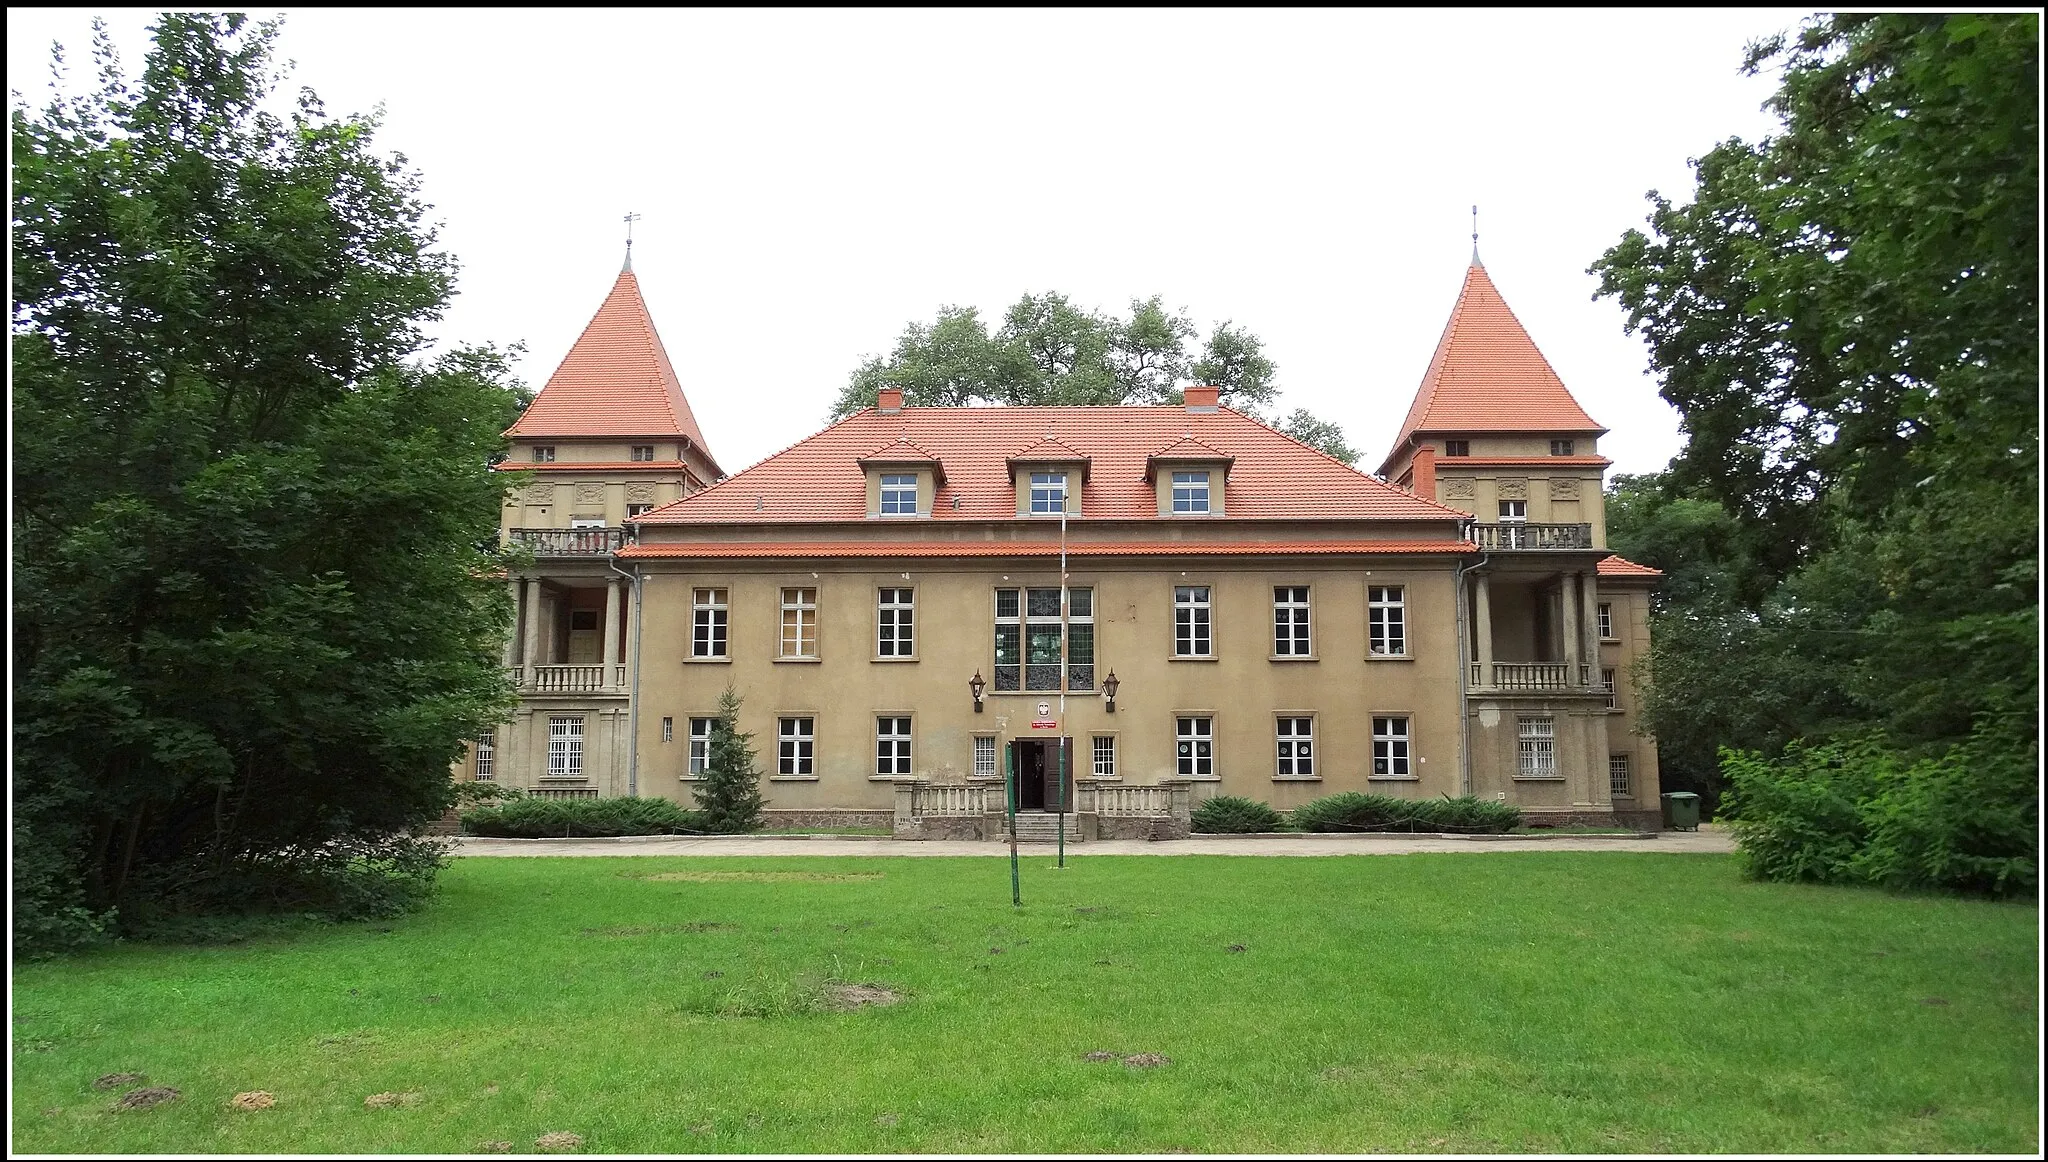 Photo showing: Bucz: the palace of the late nineteenth century. (Elevation page. Park), around the palace, the park area. 3.5 ha at the turn of the seventeenth and eighteenth centuries., Historic stand: oaks, linden. / Gm. Przemęt / pow. wolsztyński / Greater